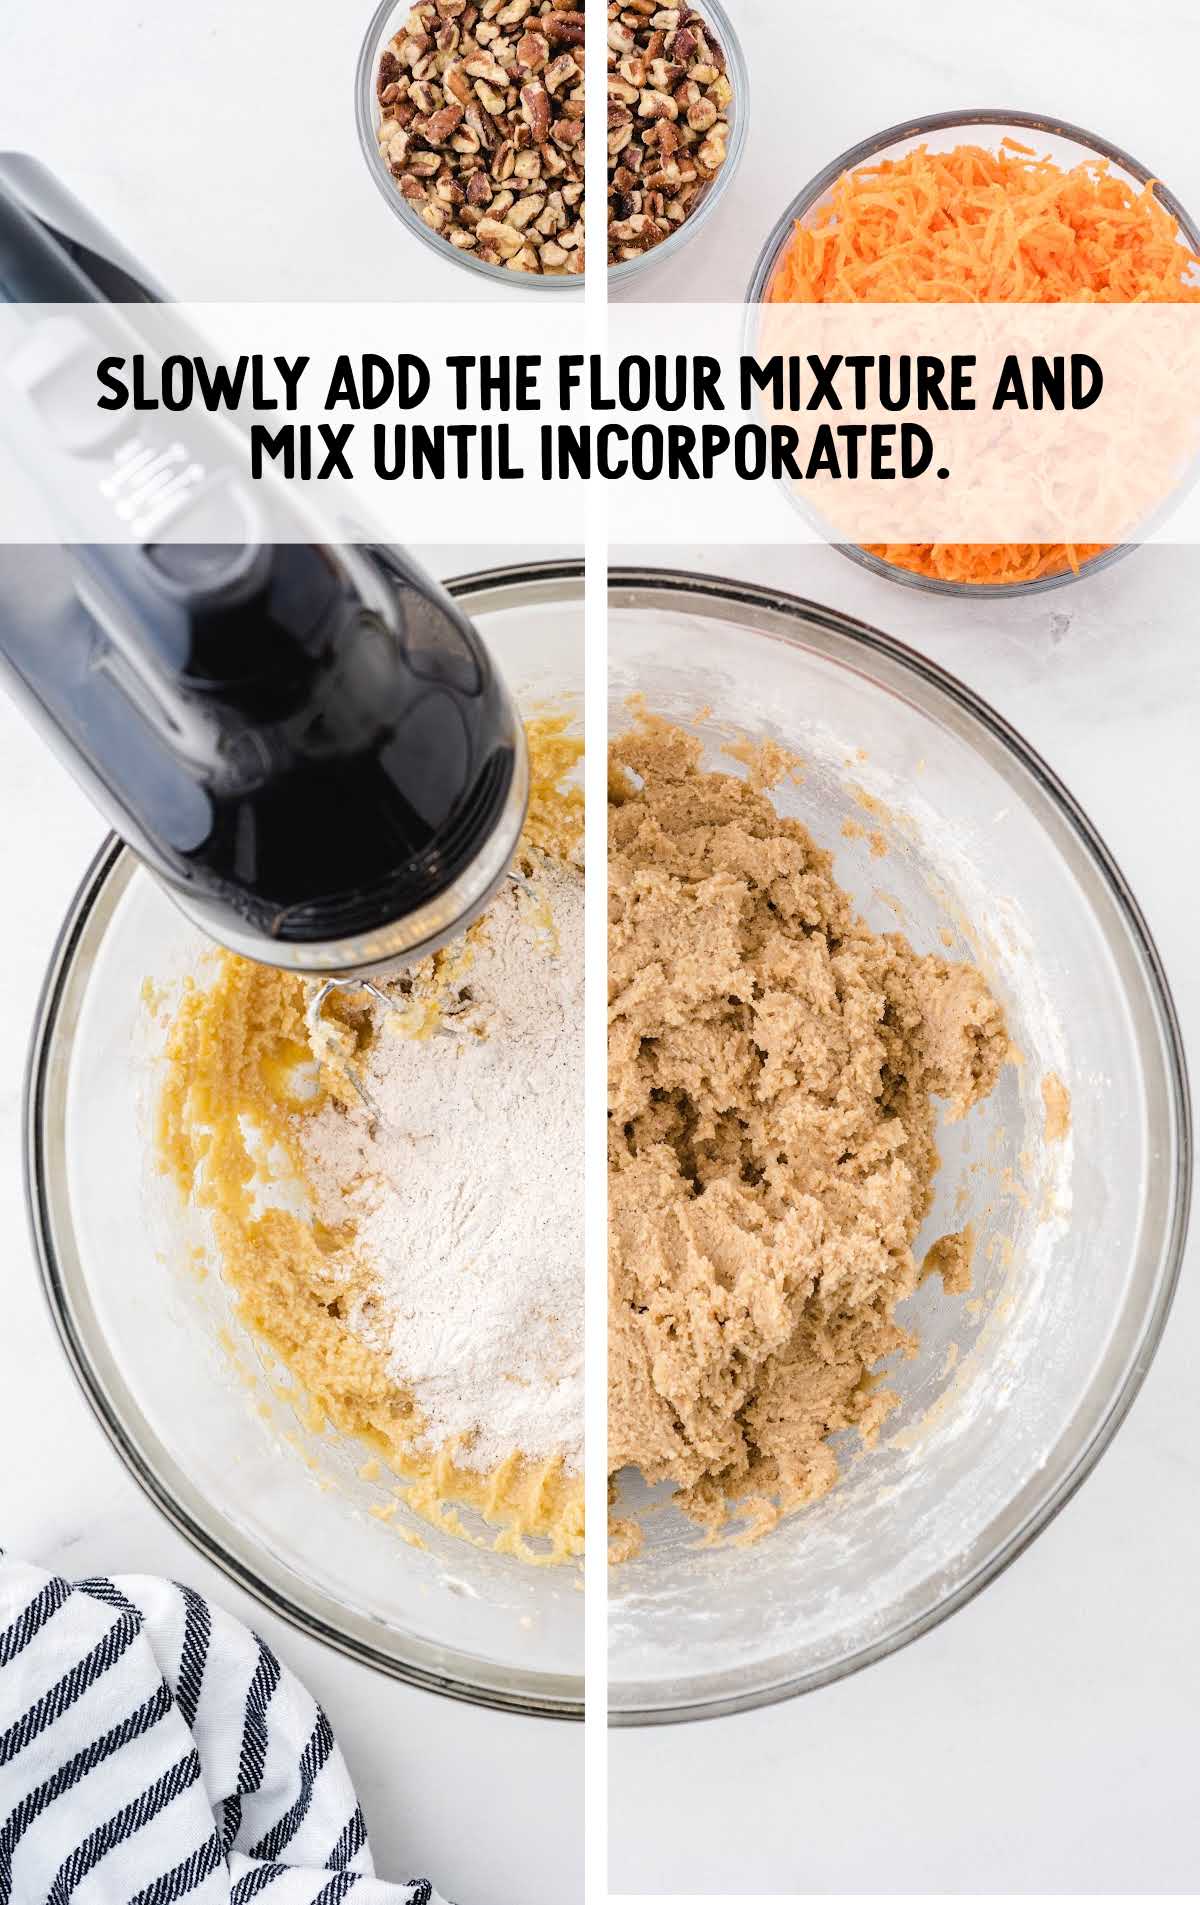 the flour mixture being blended together into the bowl of ingredients